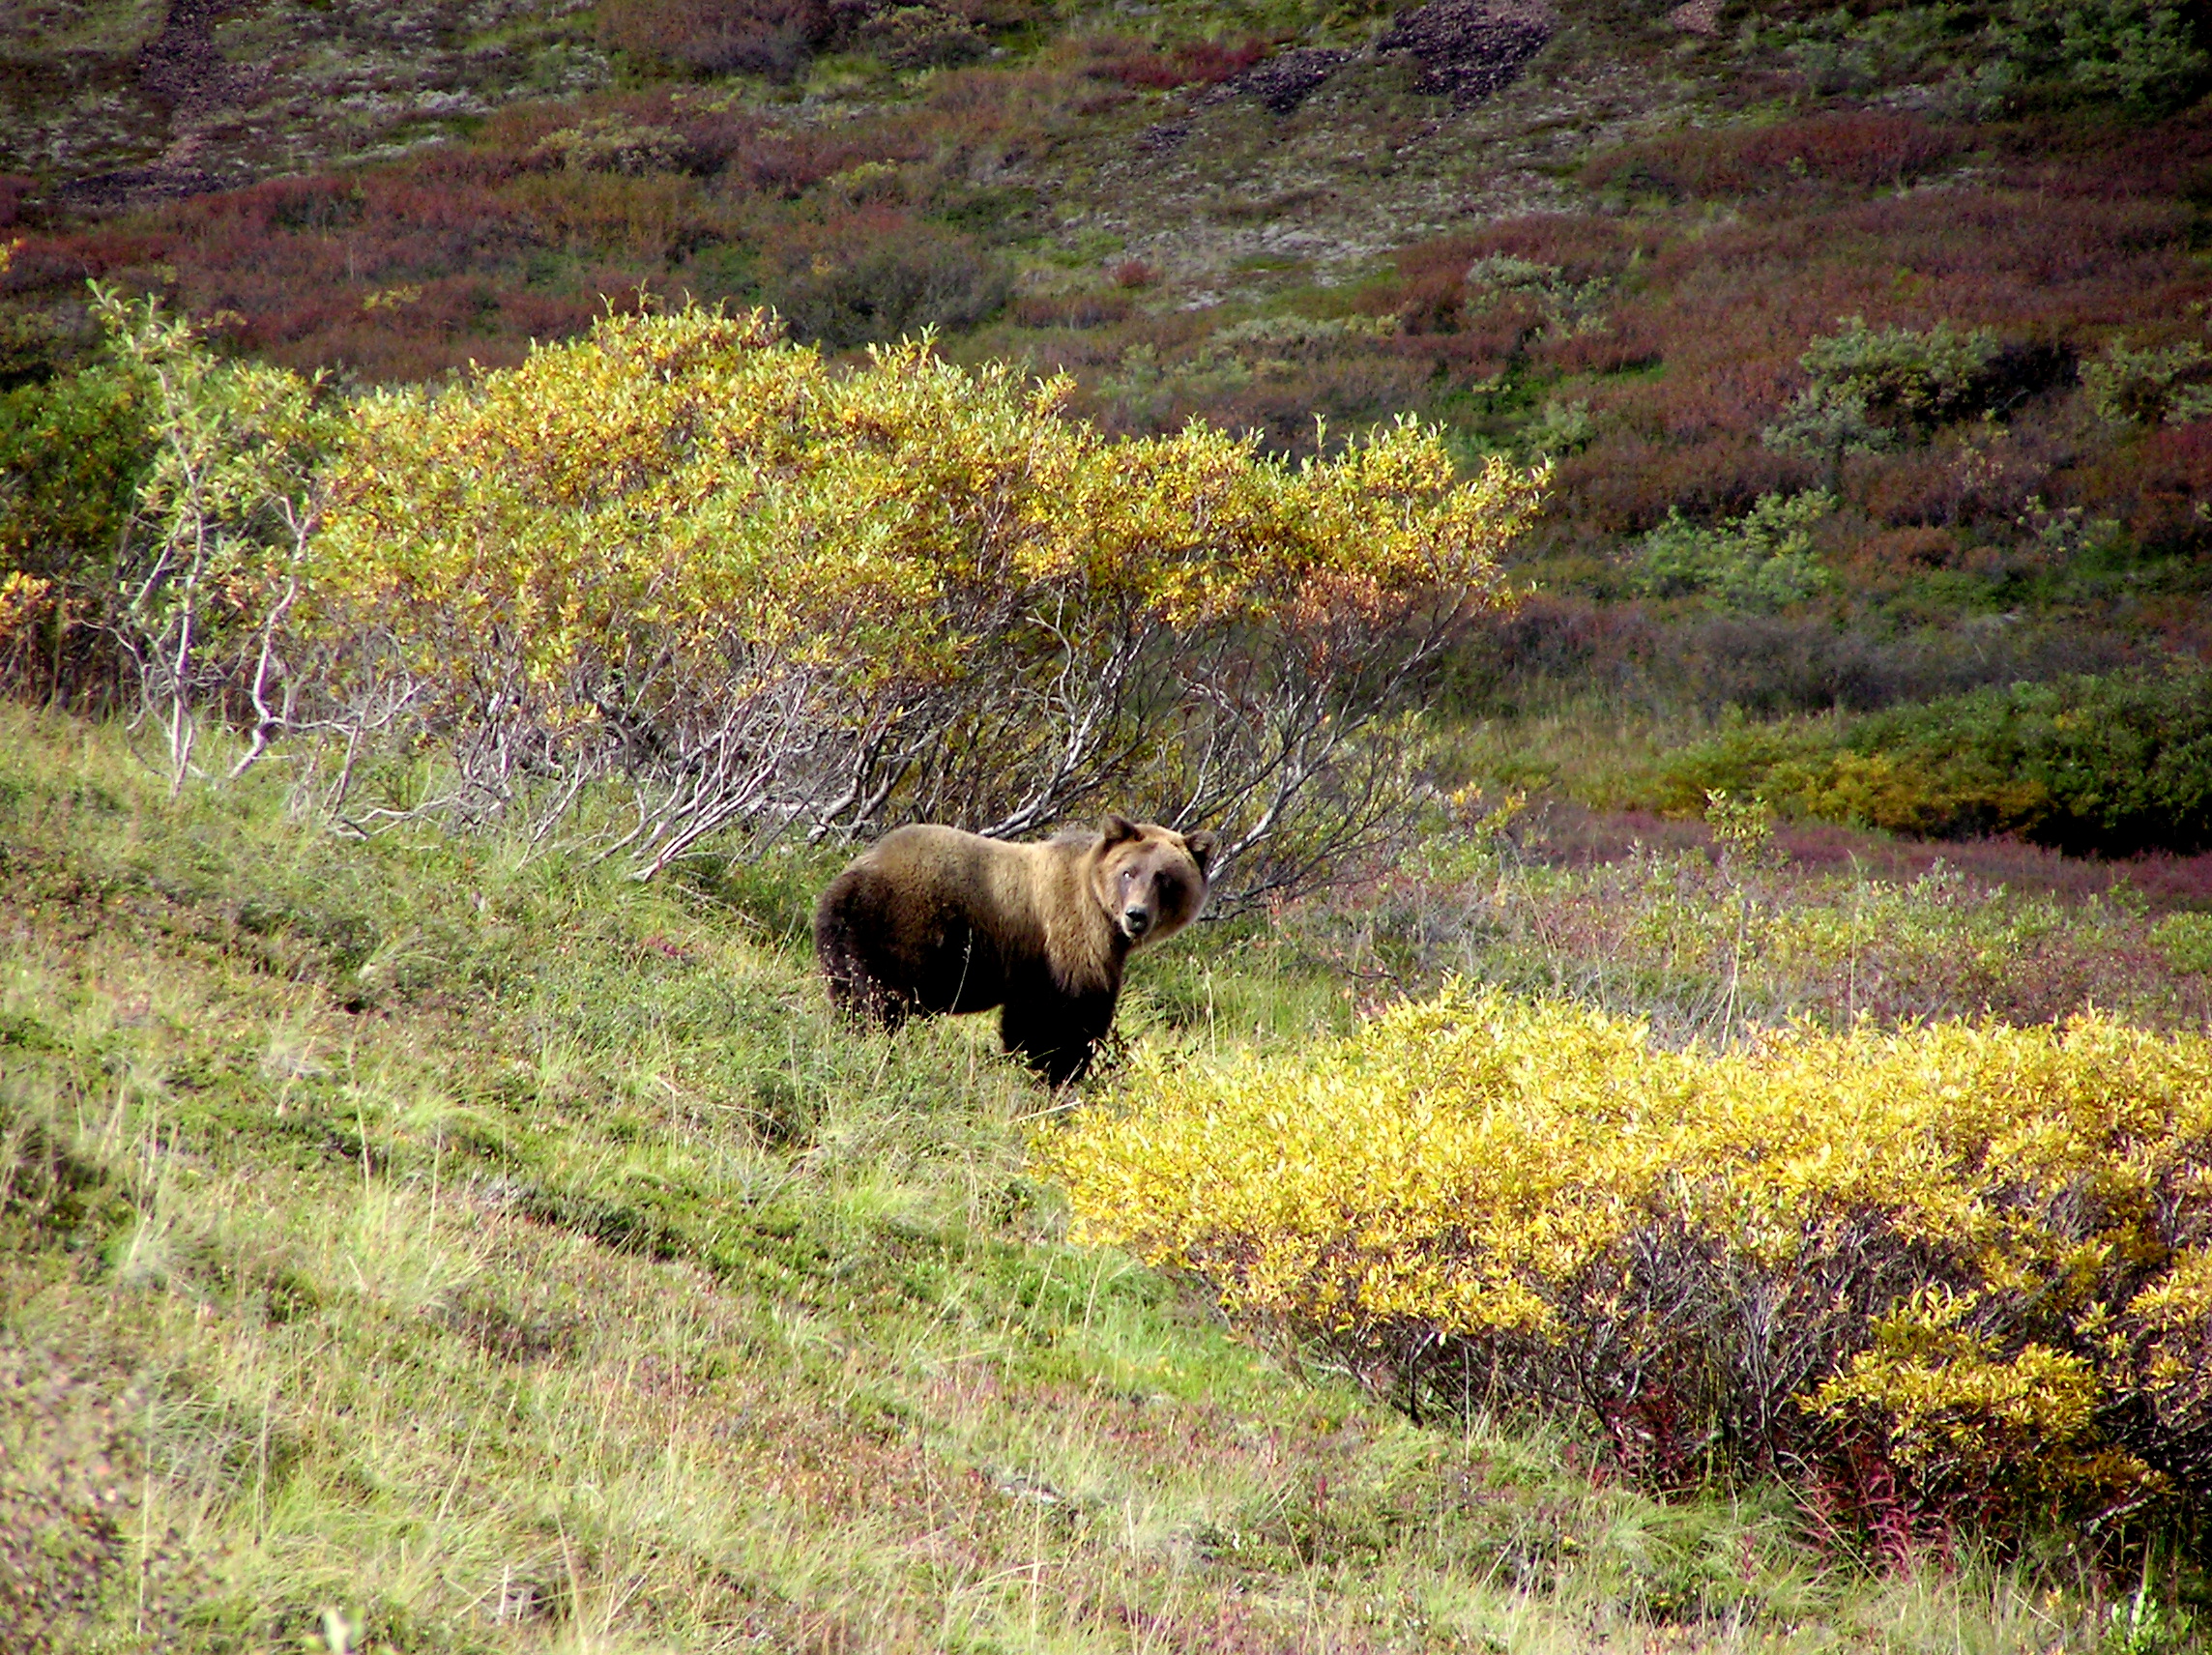 A Denali grizzly bear stands near the Park road. (photo by Brian Leukart)